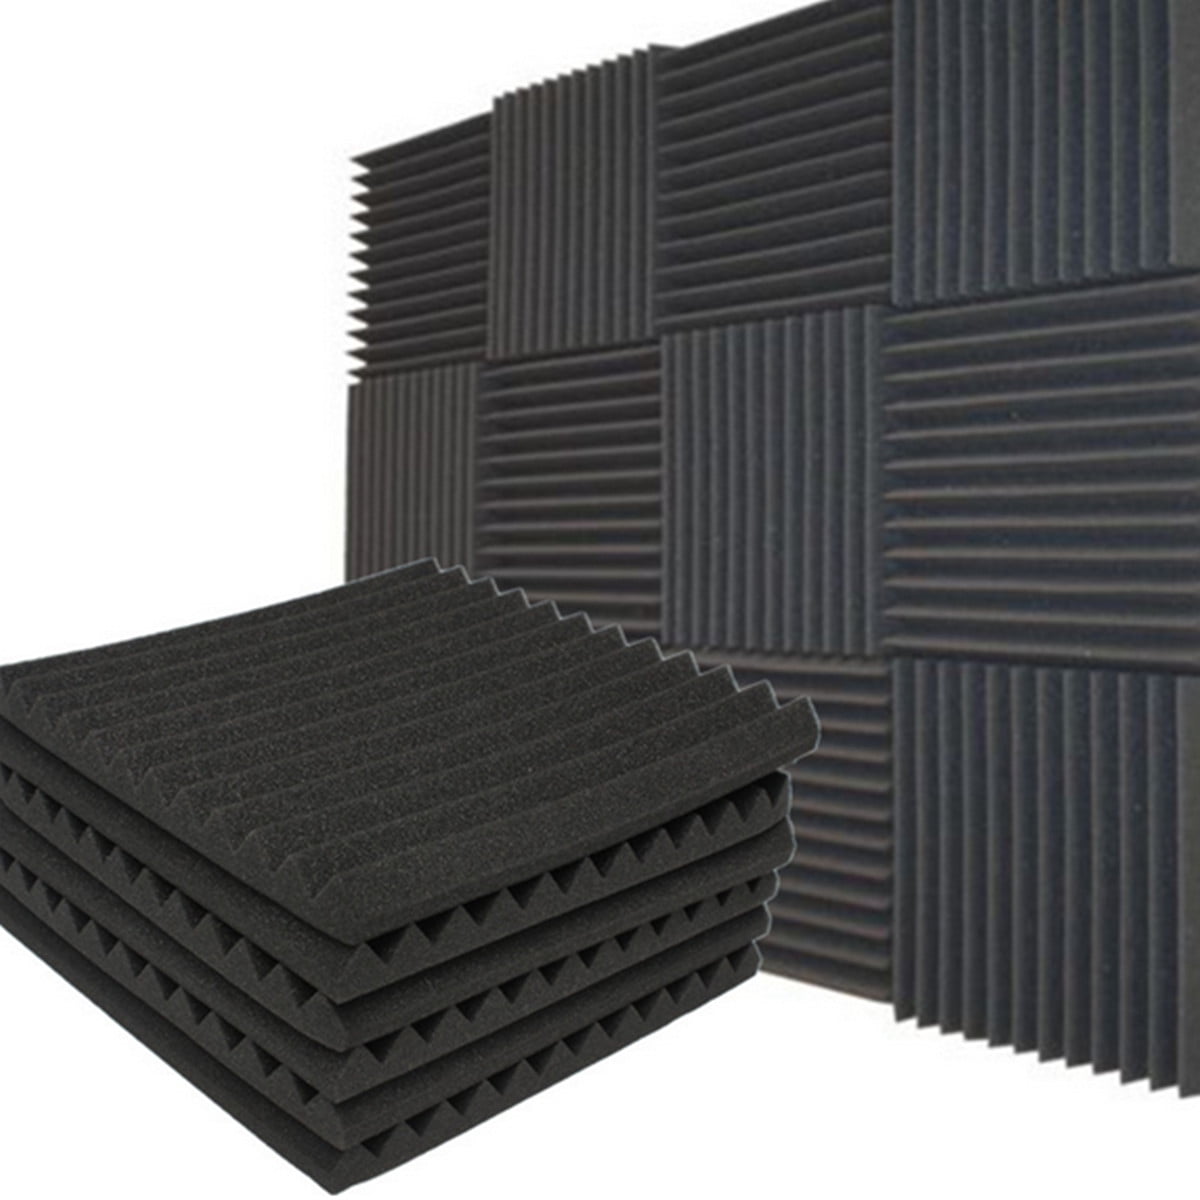 12 Pack 2x12x12 Acoustic Foam Panels with High Density Self-adhesive sound proofing padding for wall Black Sound Foam Panels for Recording Studio Sound Proof Foam Panels Room and Office 